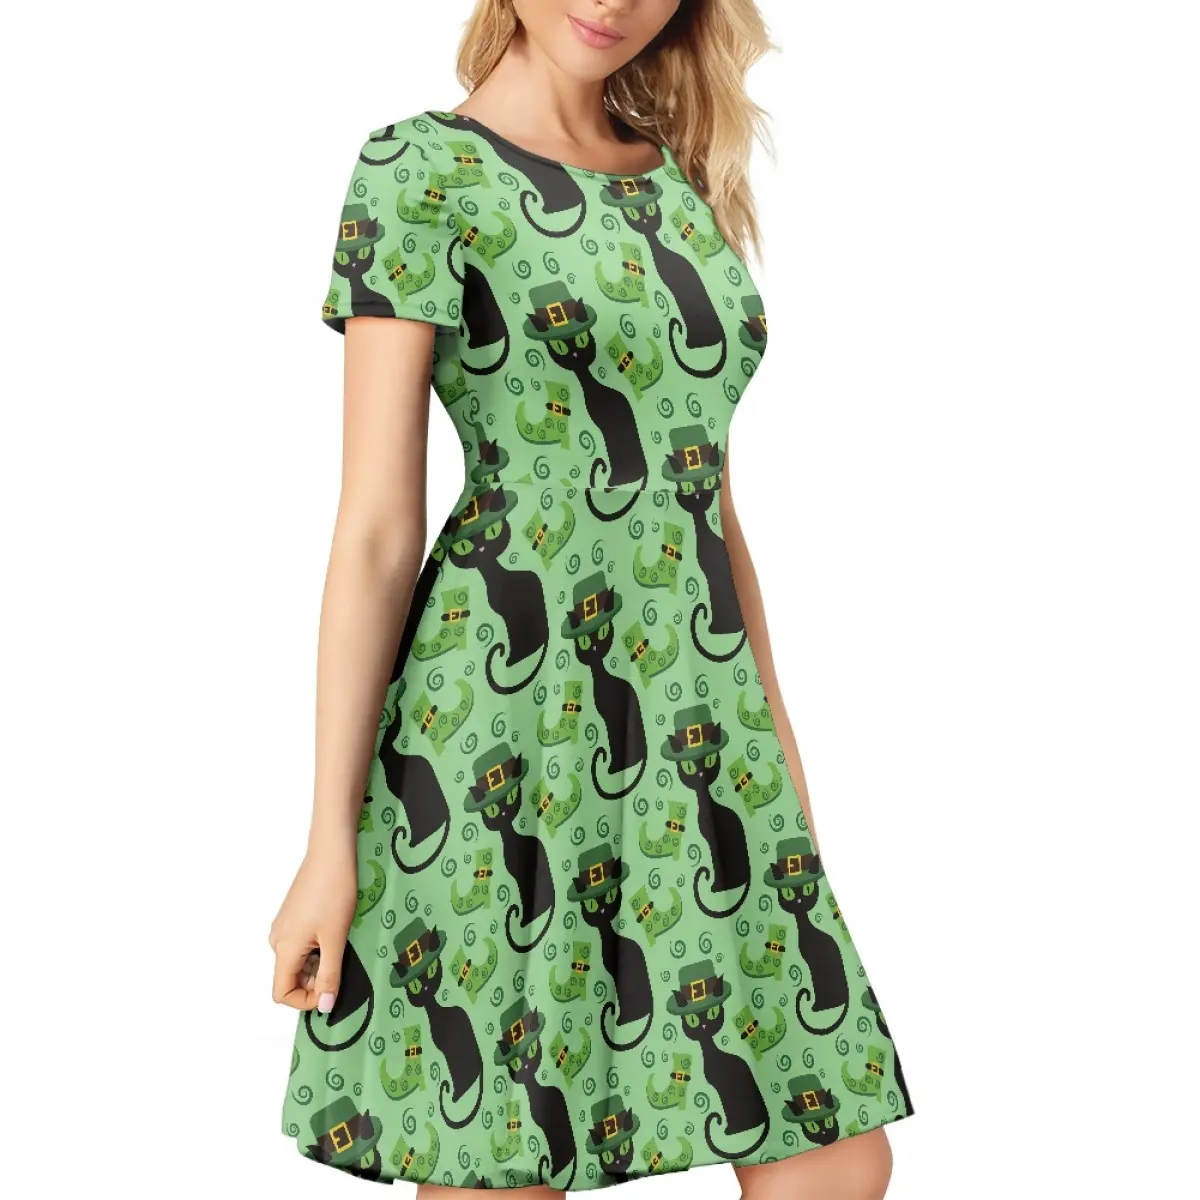 2023 New Lady Clothes Summer Casual Short Sleeve A-Line Dress Black Cat Print St. Patrick's Day Party Dresses Women Elegant